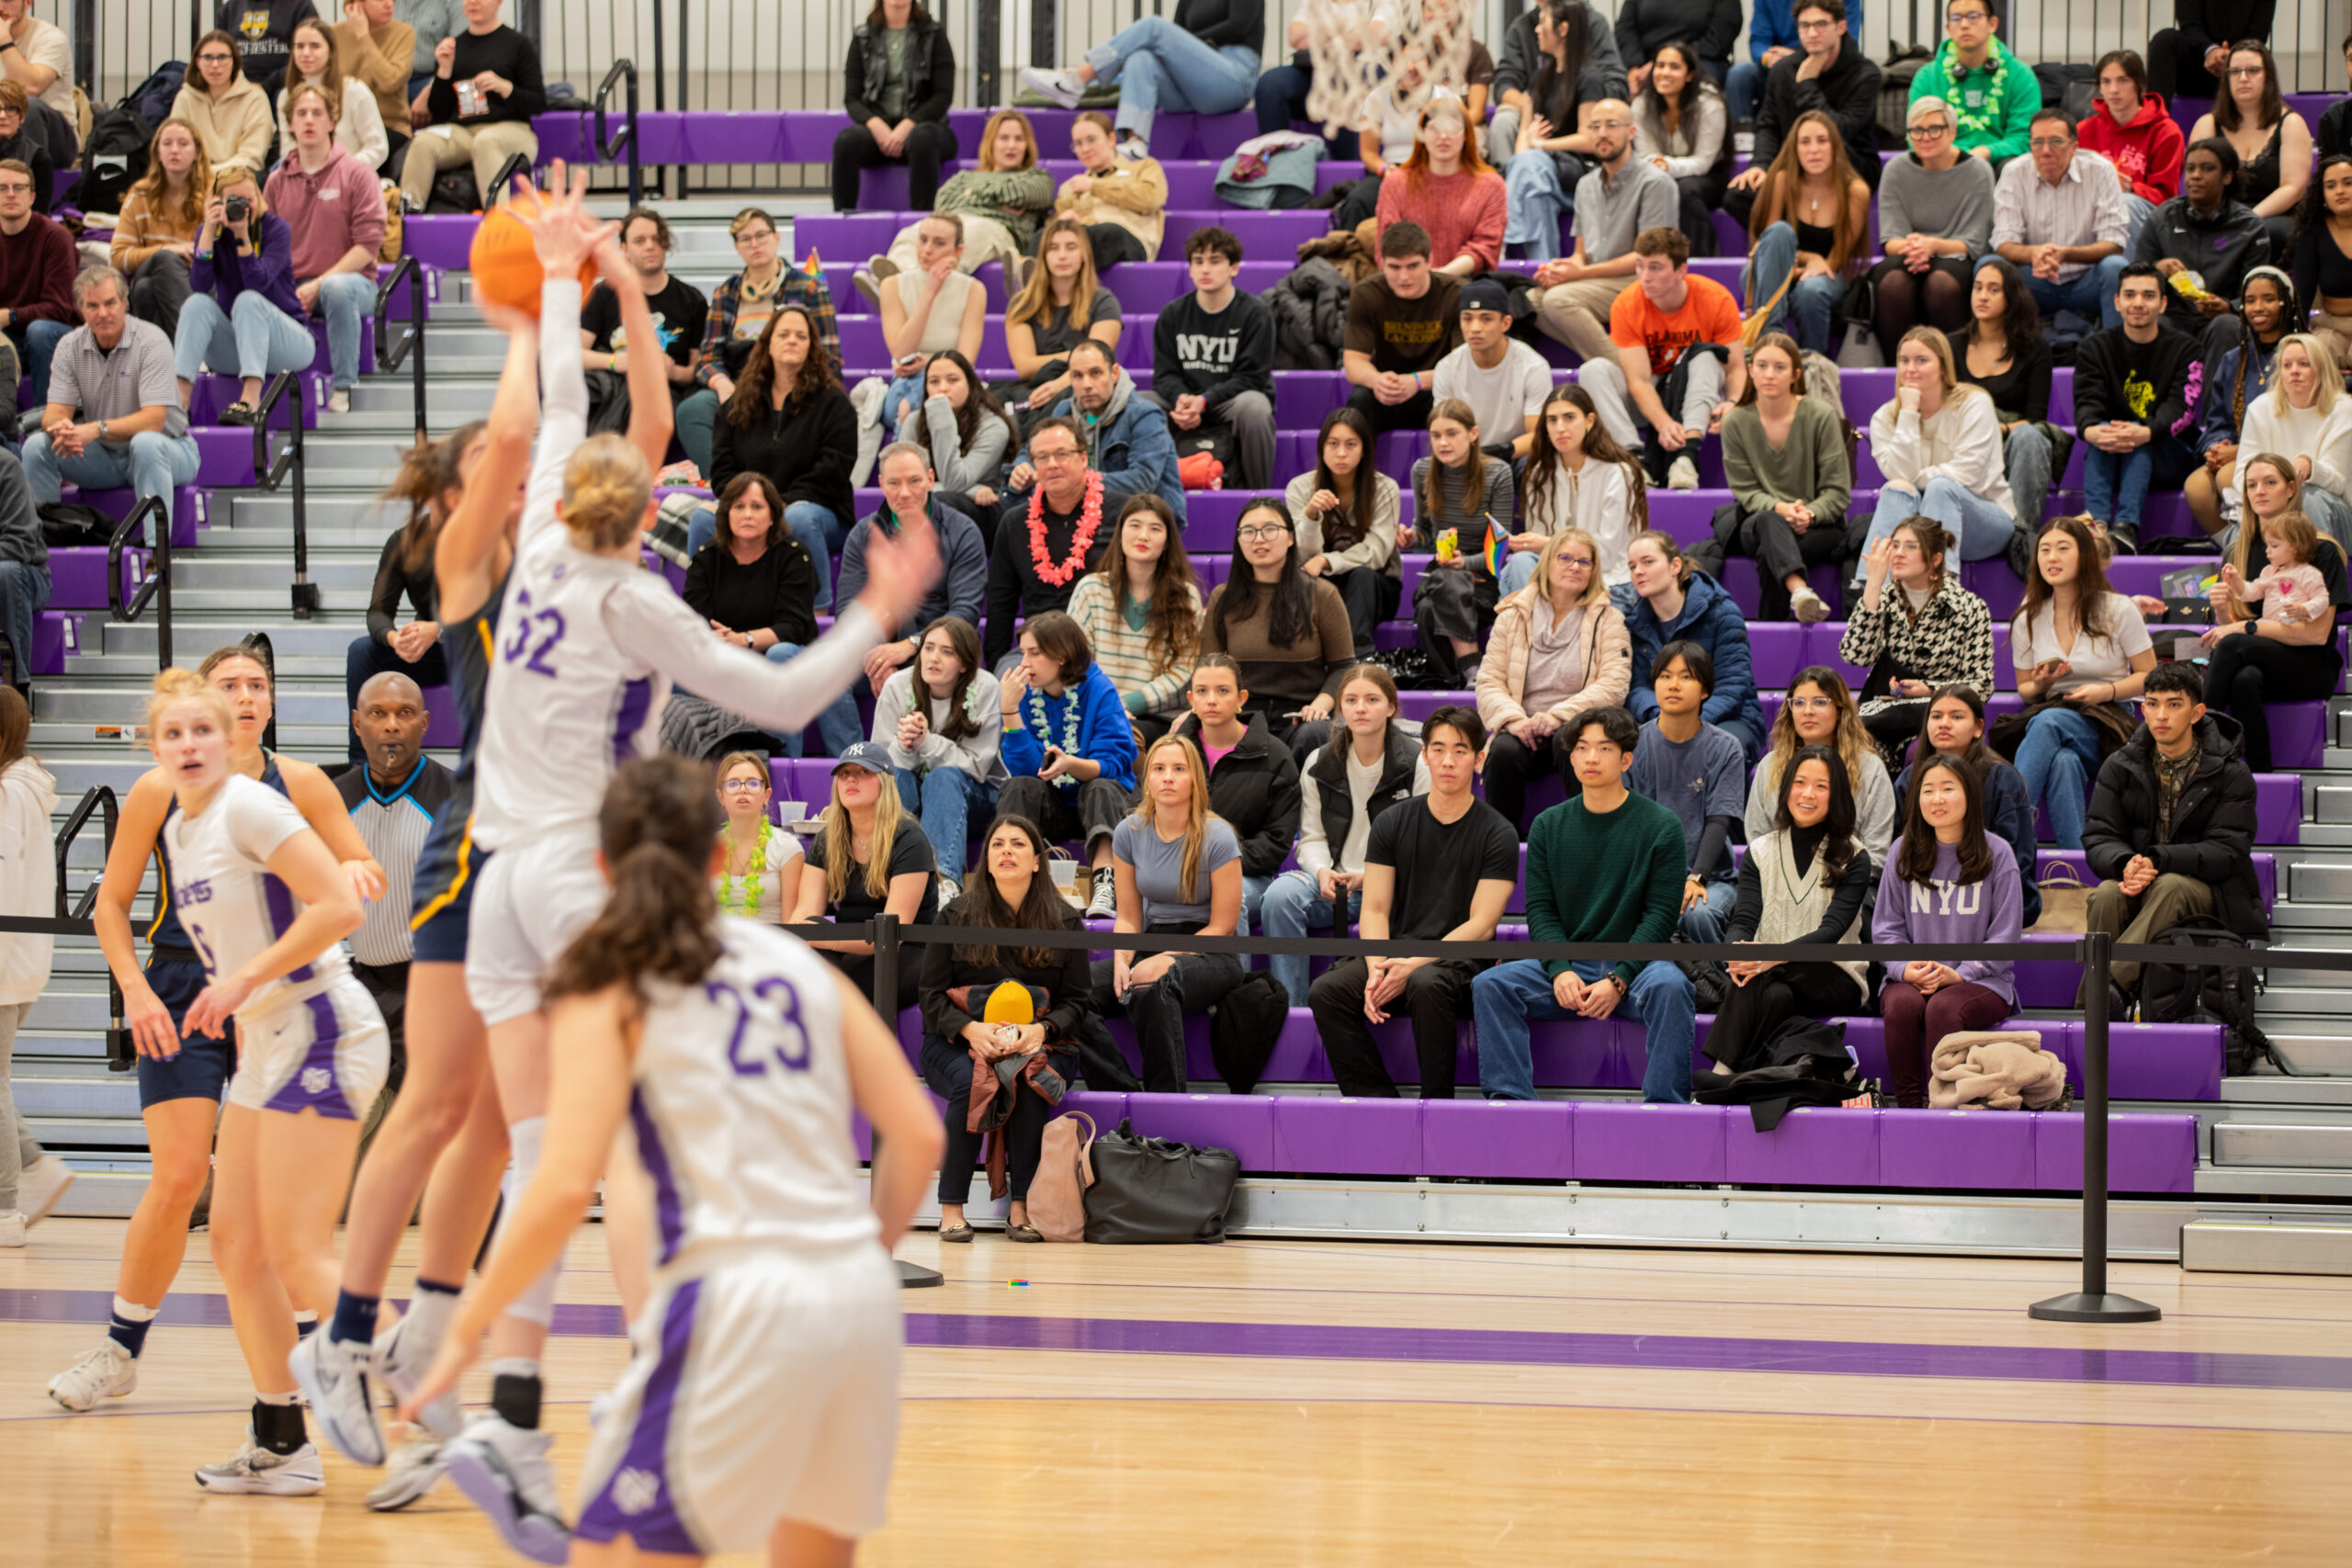 A women’s basketball game is in action with a player shooting the ball to try to make a basket. The defense player attempts to block the shot. The stands in the background are filled with spectators.